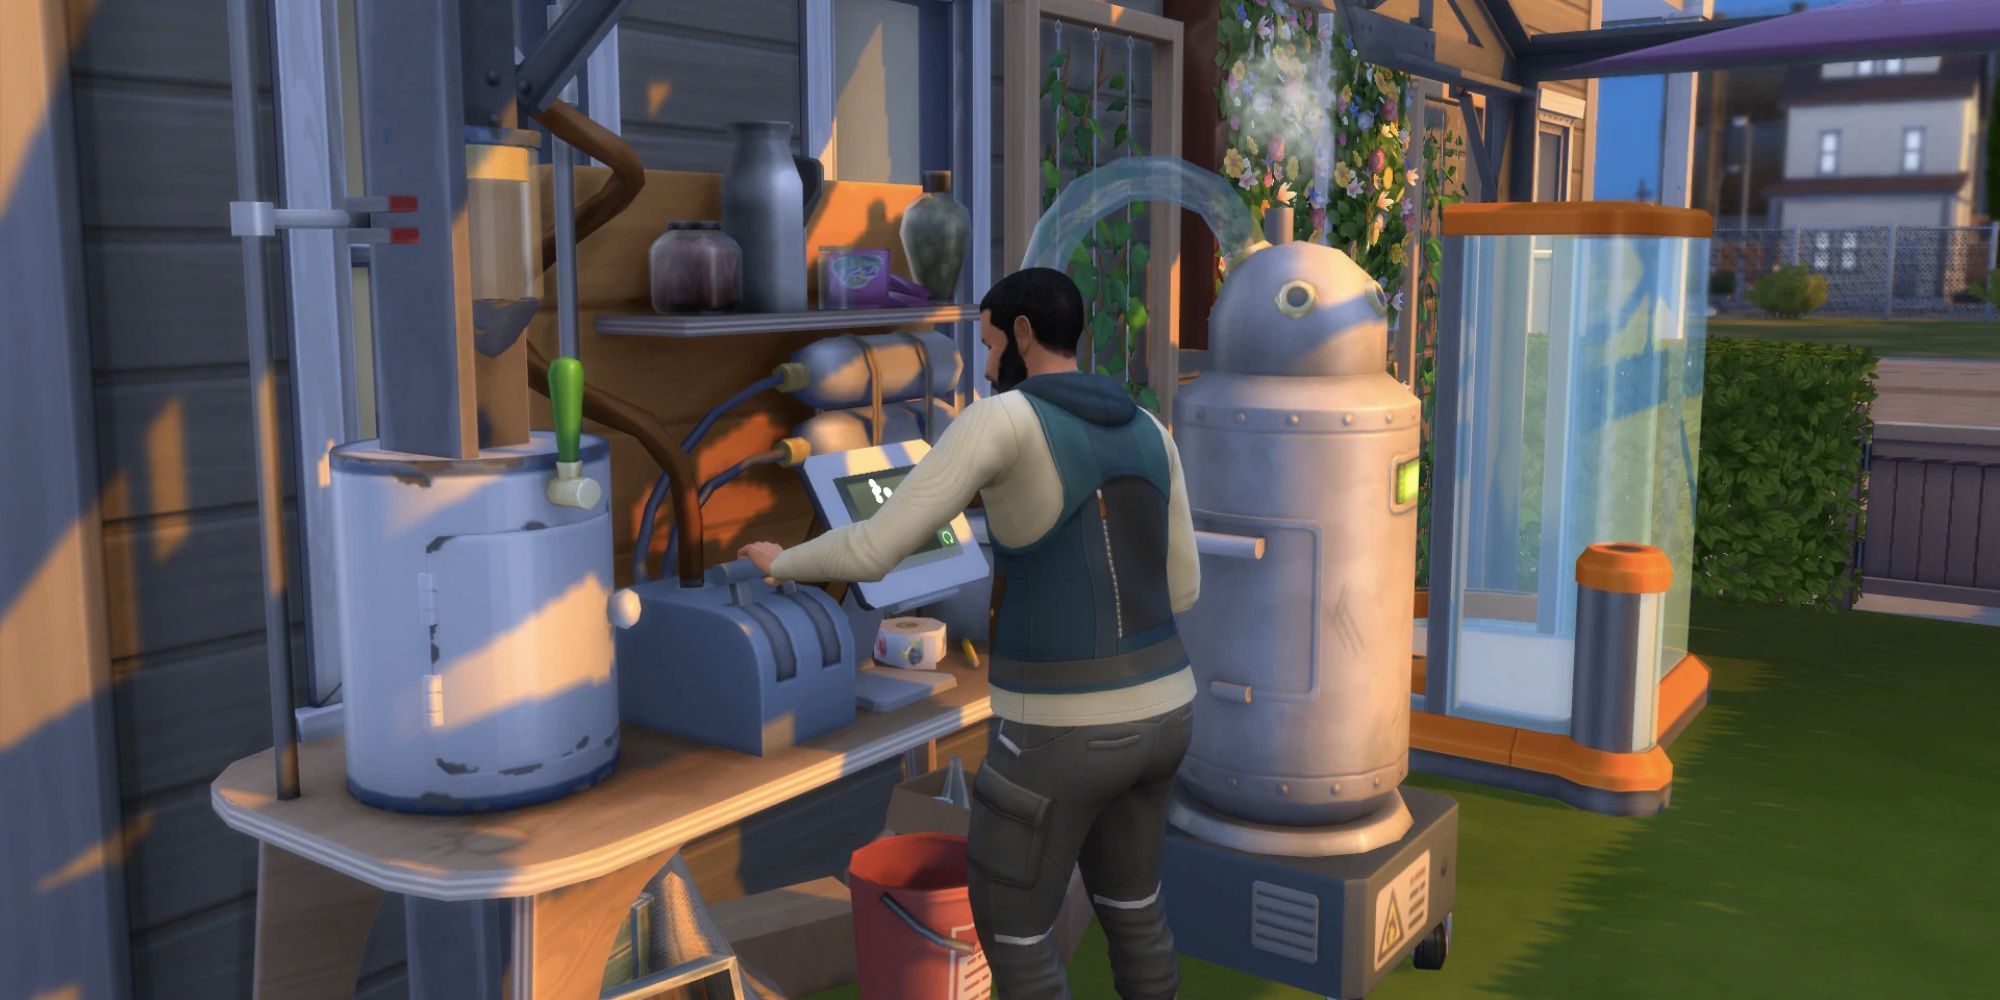 The Sims 4 Juice Fizzing Skill